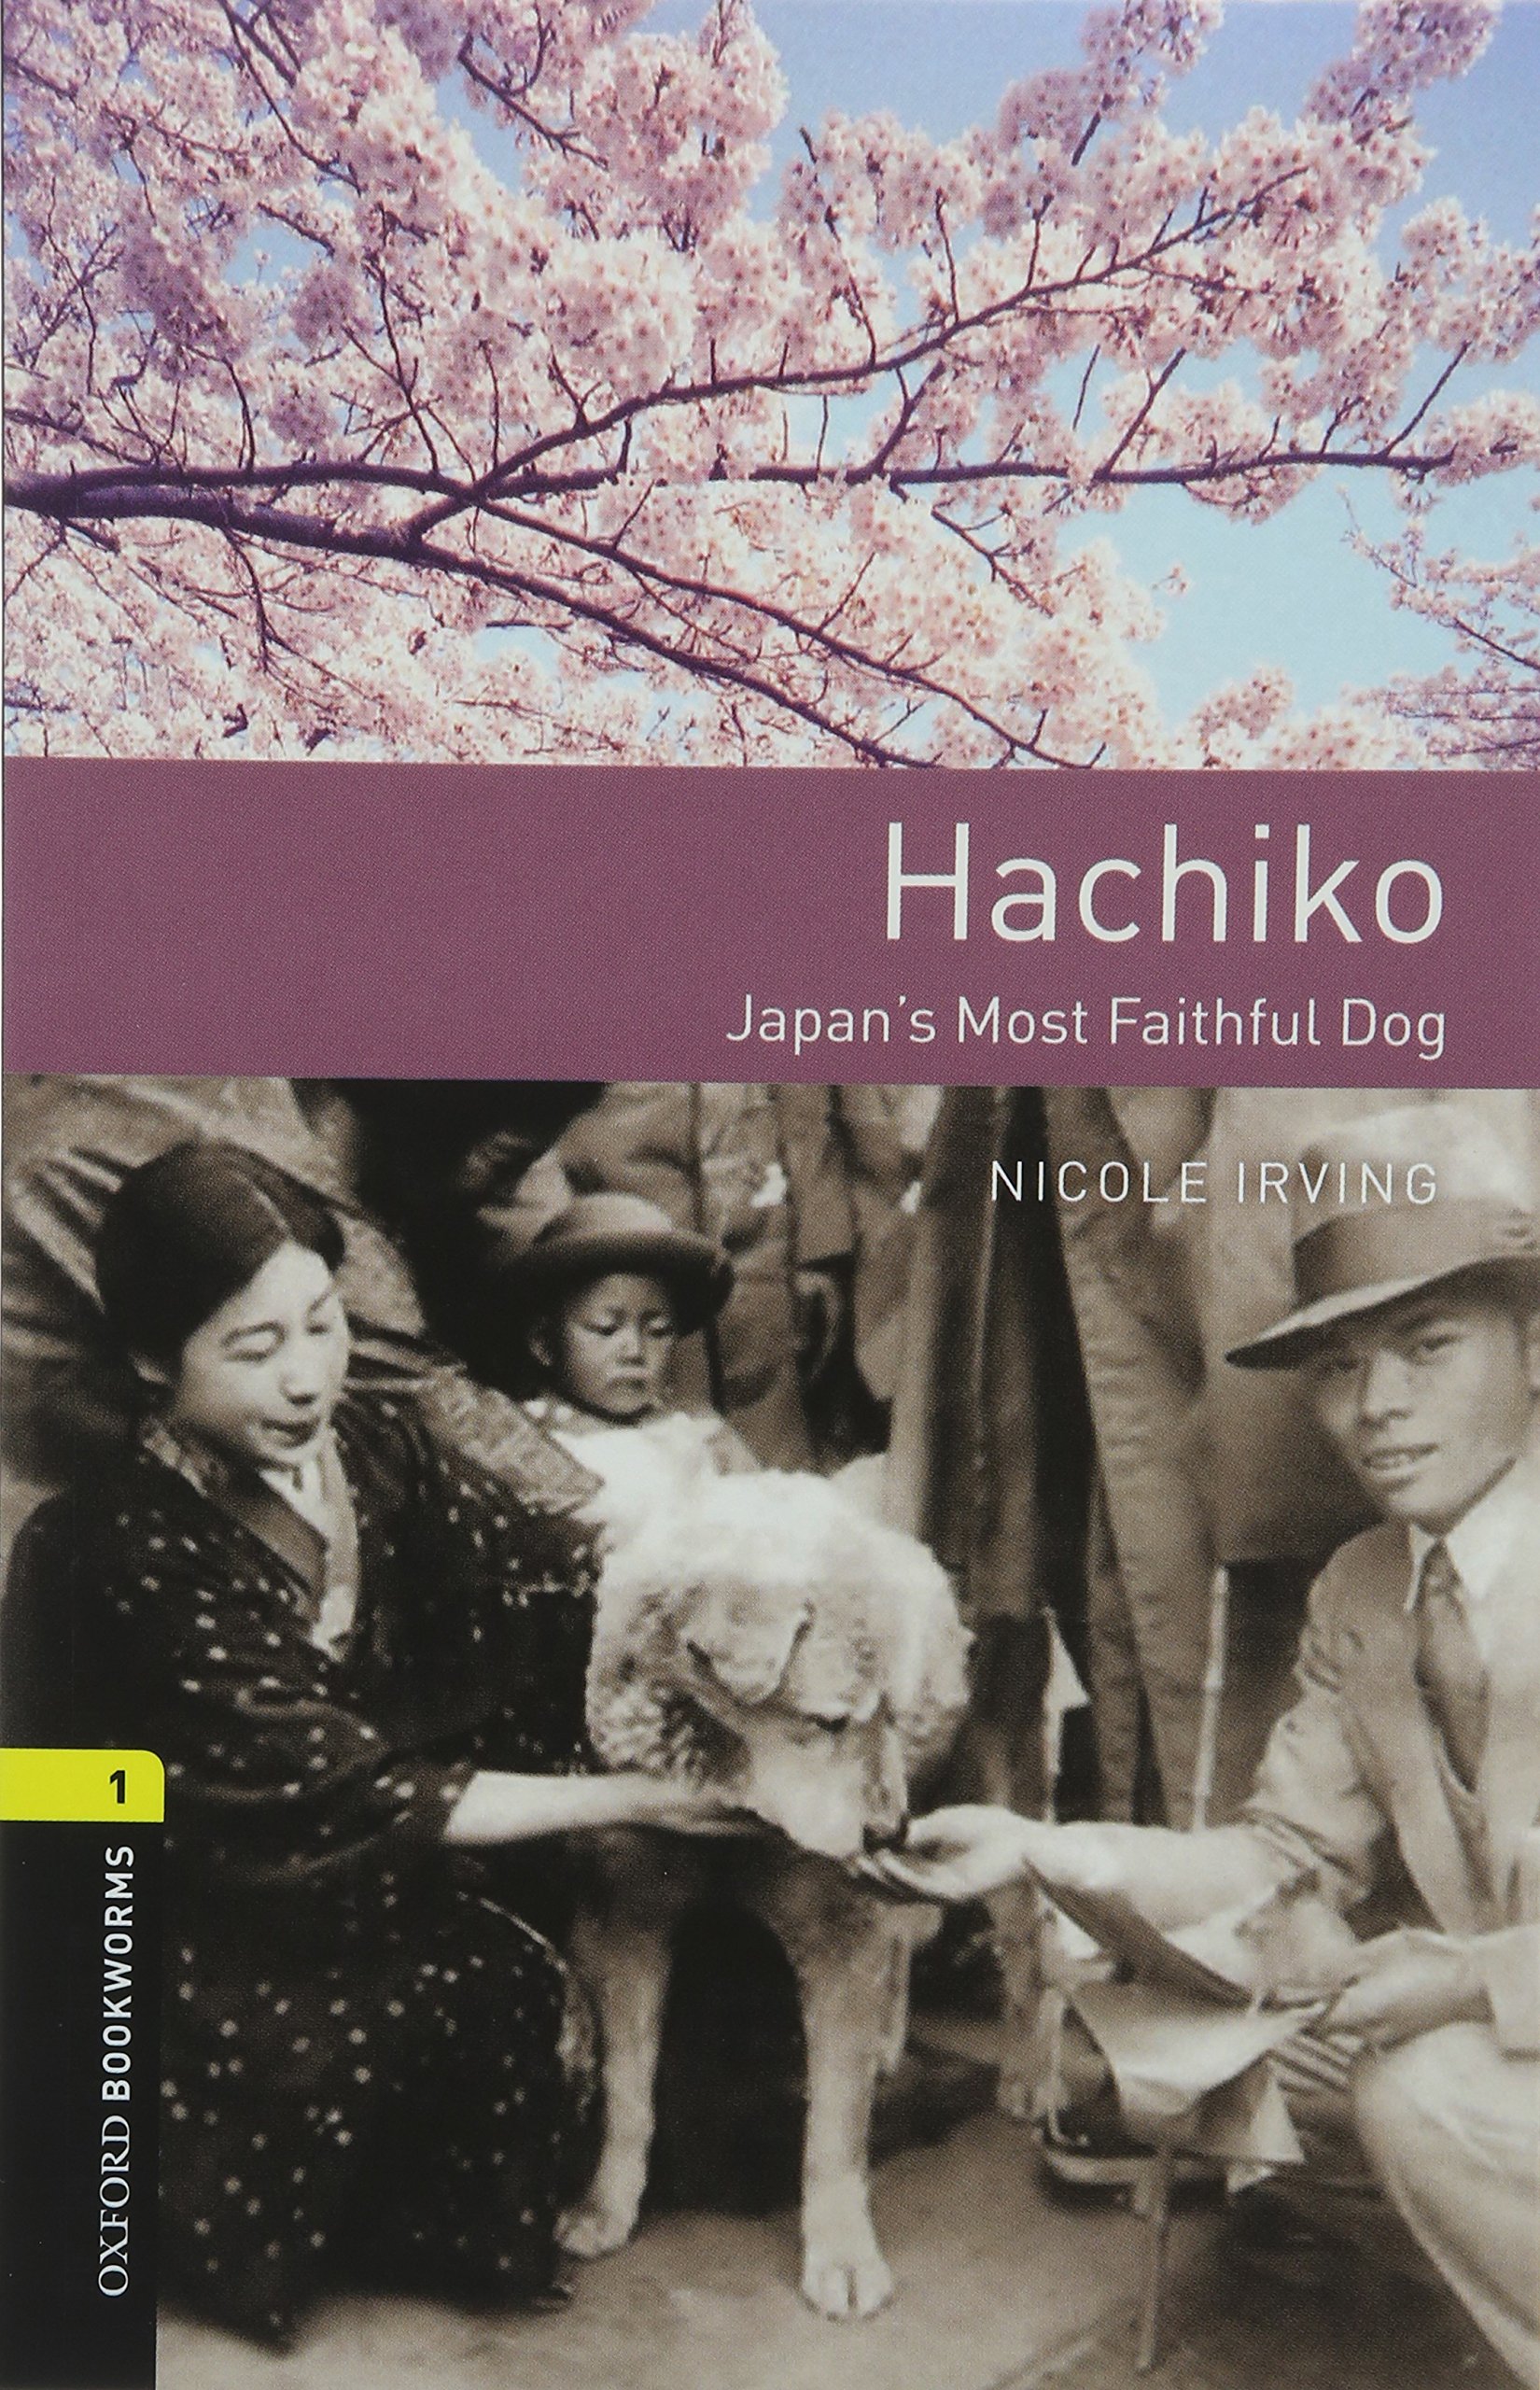 HACHIKO (OXFORD BOOKWORMS LIBRARY, LEVEL 1) Book with MP3 download